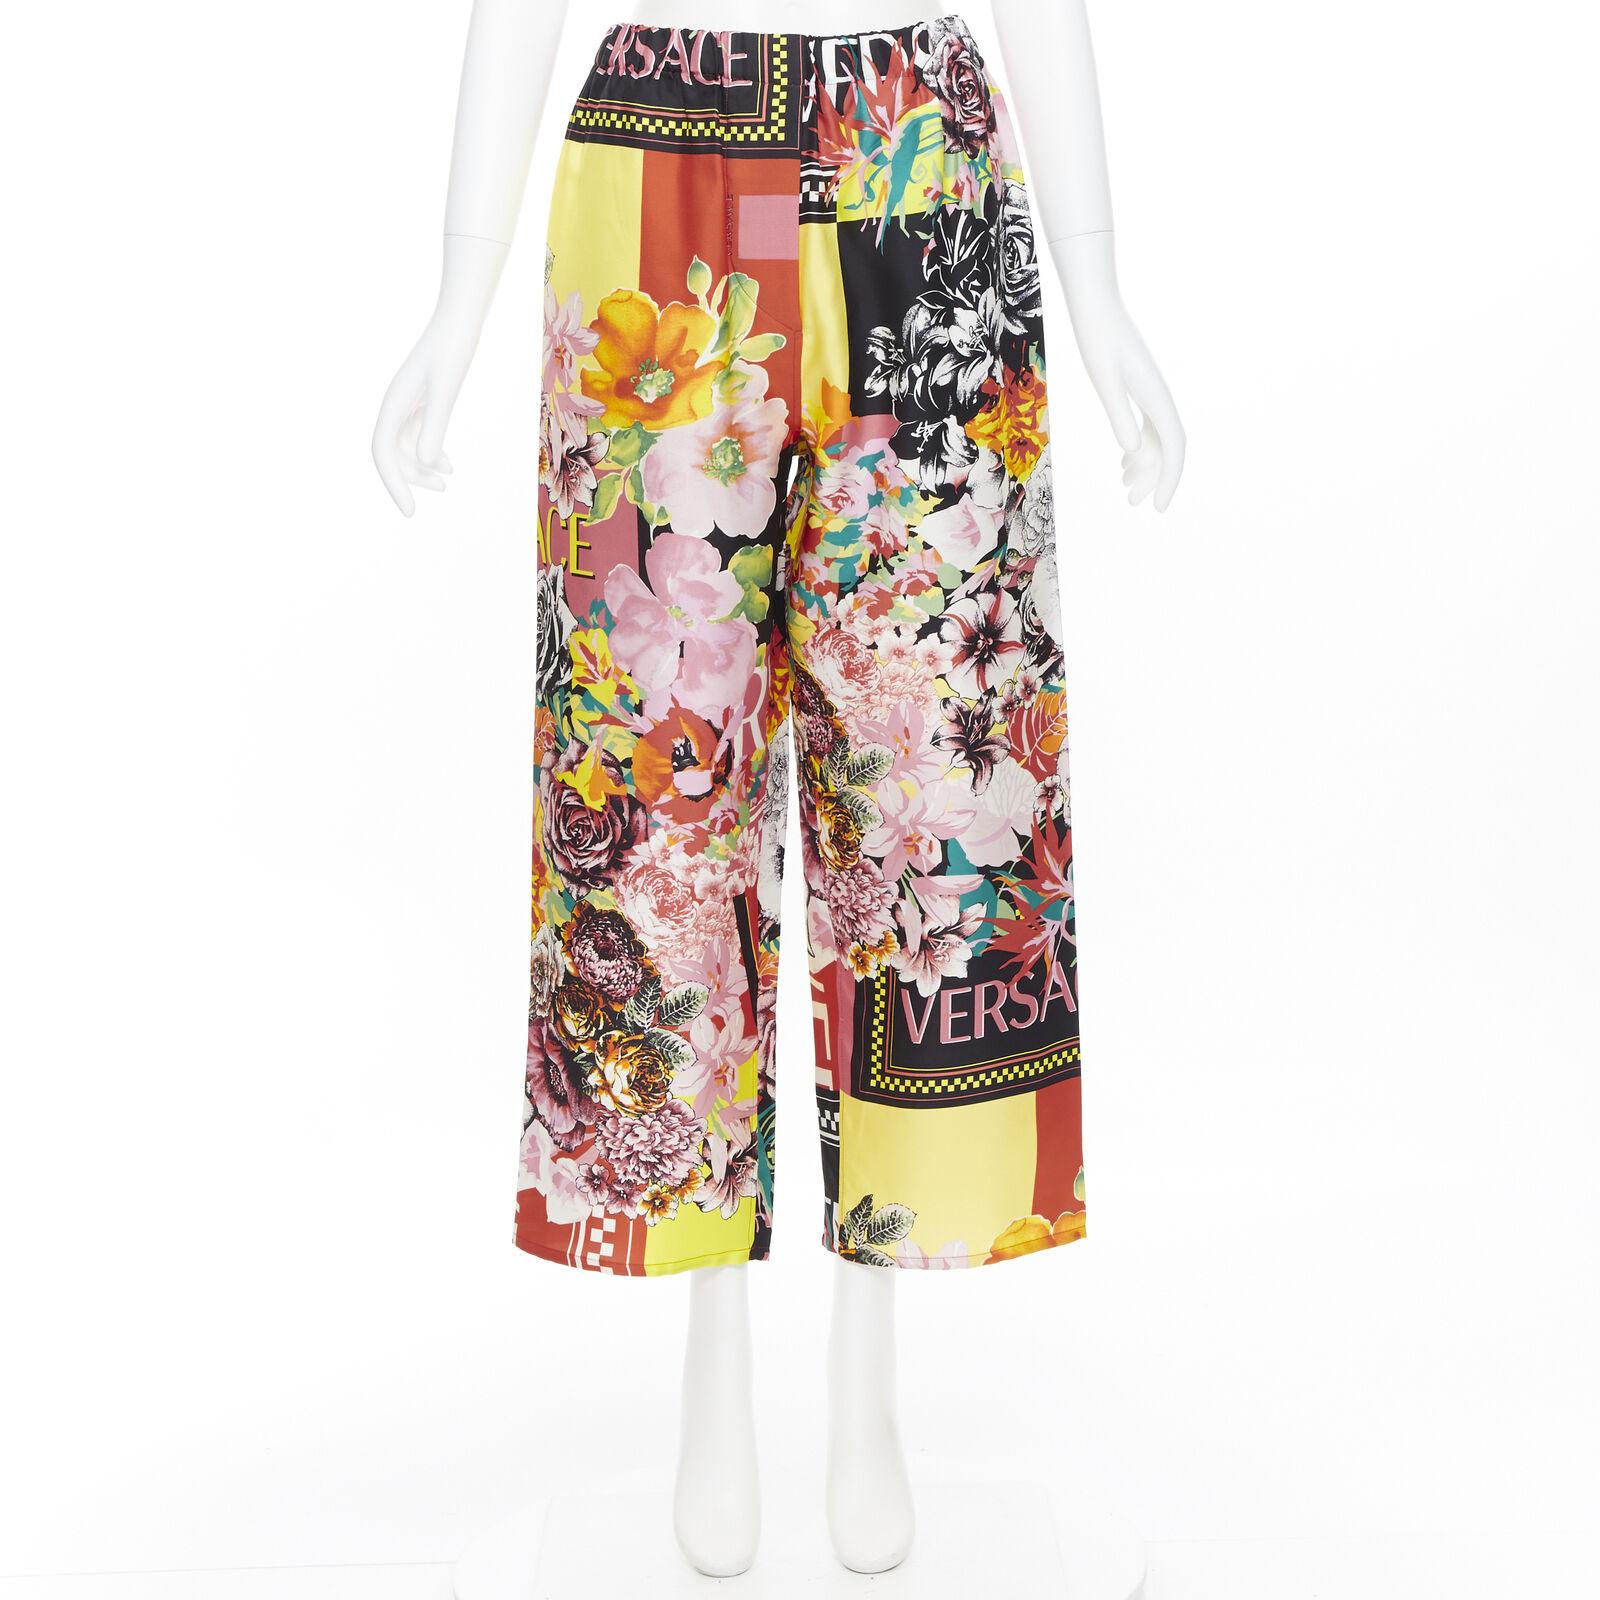 new VERSACE 100% silk SS19 floral flower box logo print casual pants IT38 XS
Reference: TGAS/A05477
Brand: Versace
Designer: Donatella Versace
Model: Silk pants
Collection: Spring Summer 2019 Runway Print - Runway
Material: Silk
Color: